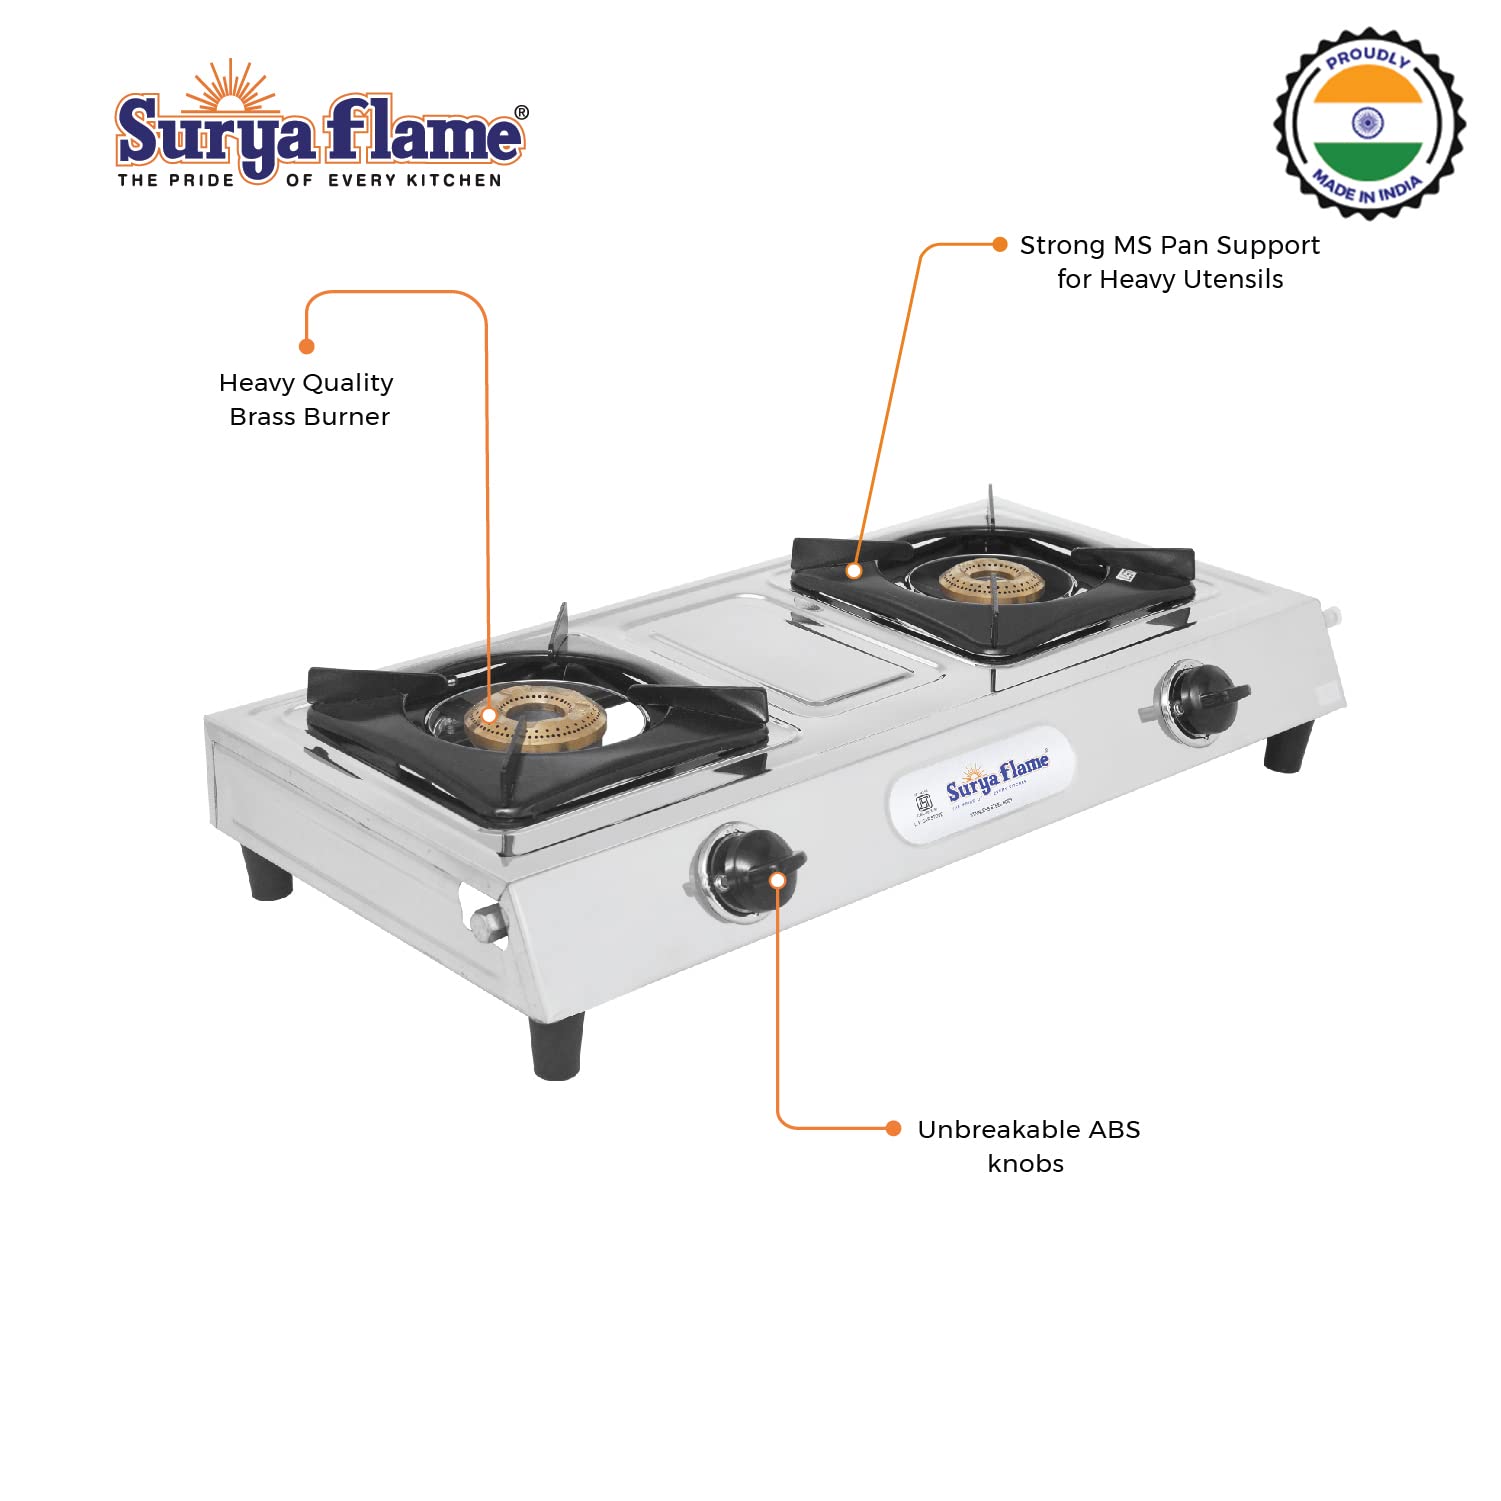 Surya Flame Venus Gas Stove, 2 Burner, Stainless Steel Body Manual LPG Stove, with Stainless Steel Pan Support - 2 Years Complete Doorstep Warranty